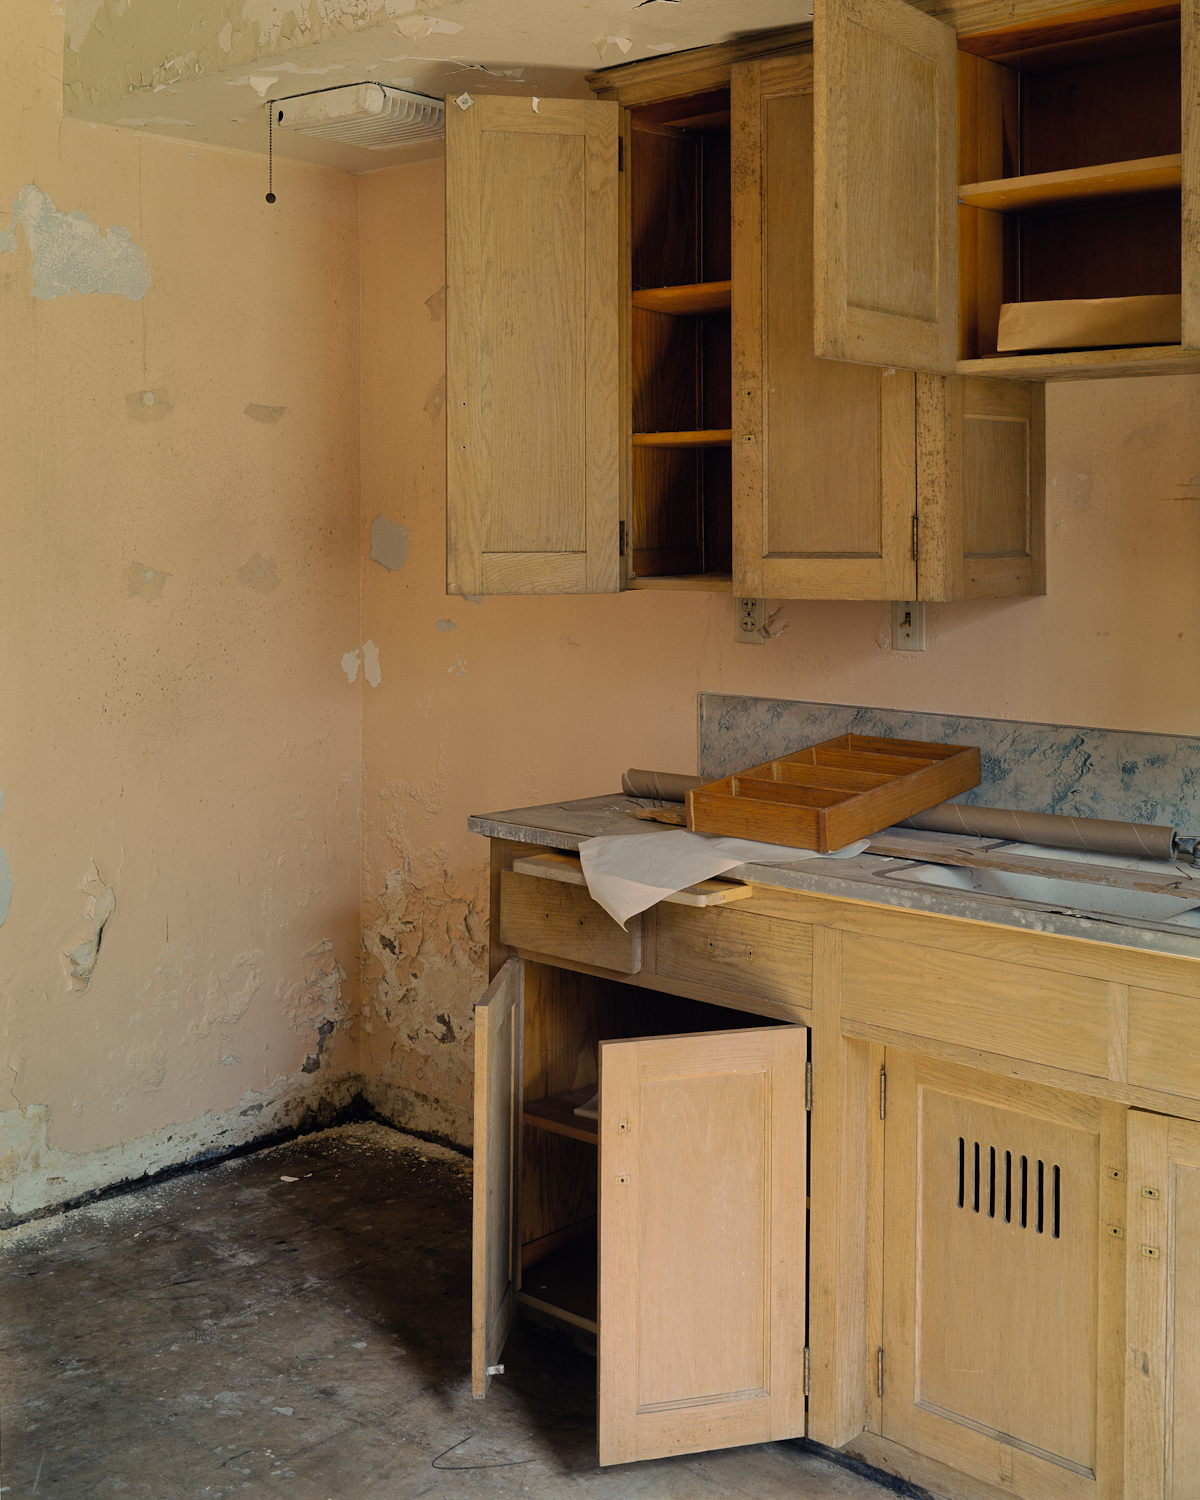 Kitchen of basement apartment, Dormitory Building.